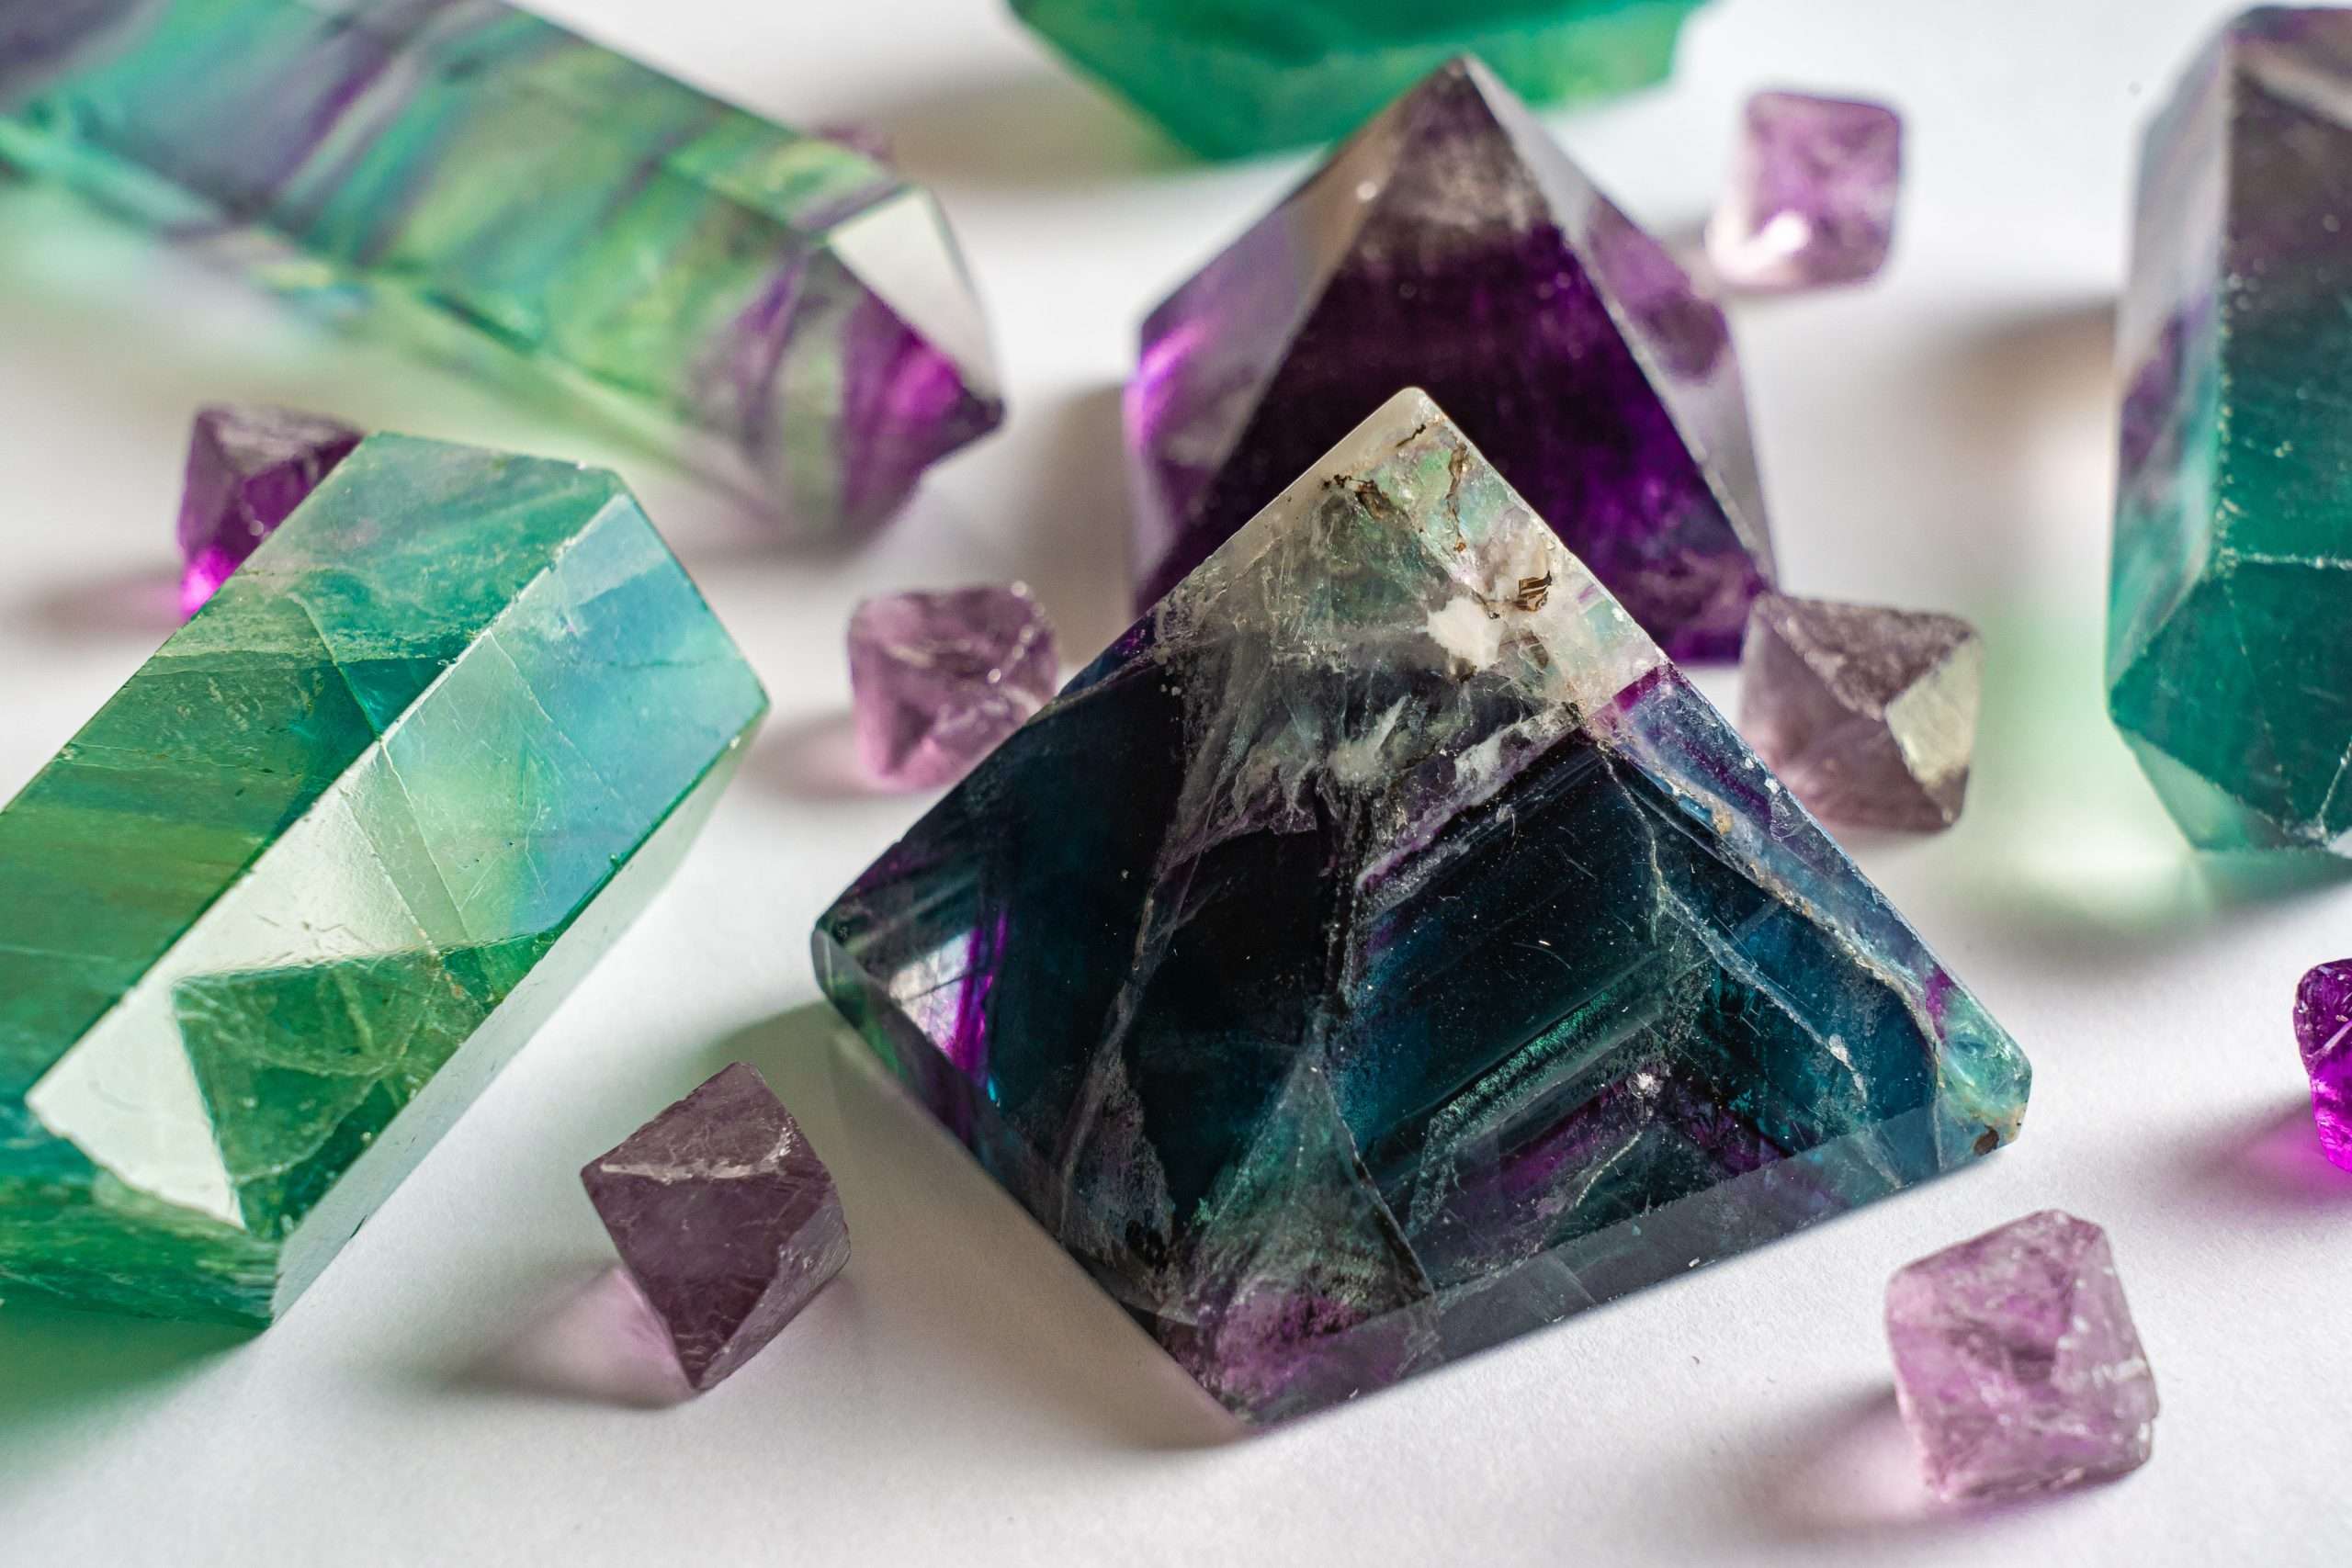 New To Crystals? See 7 Of The Best Crystals For Beginners